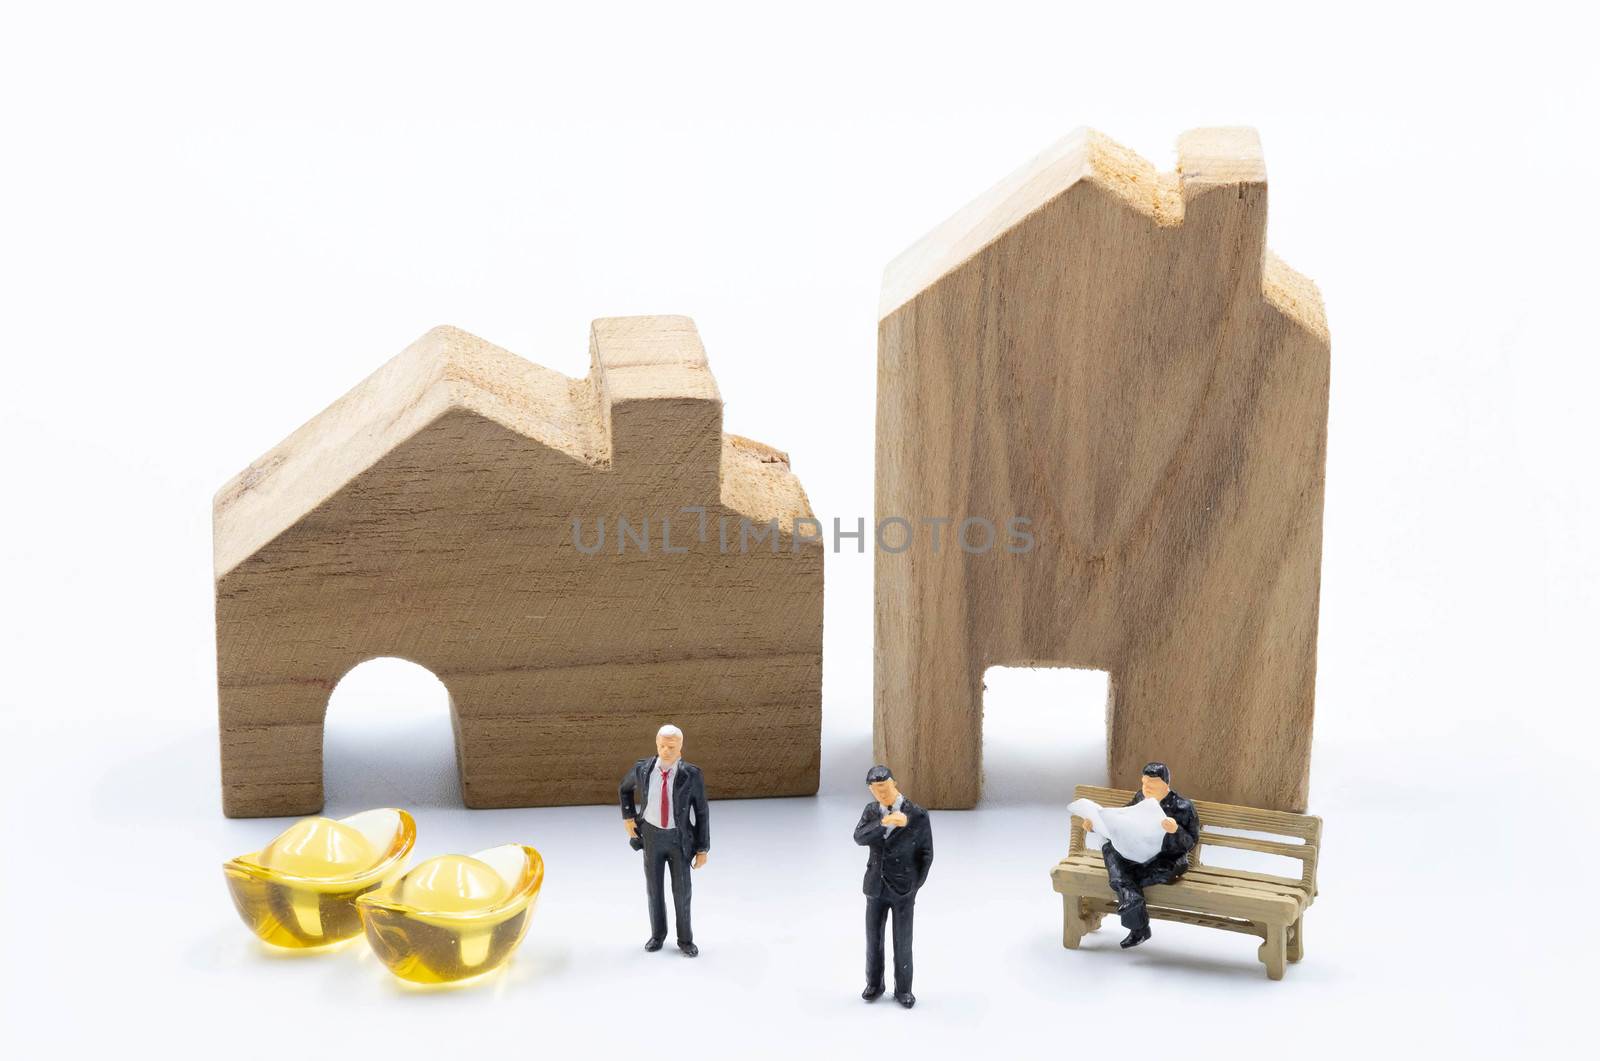 The miniature business man with the Gold in front of the buildin by Bonn2210